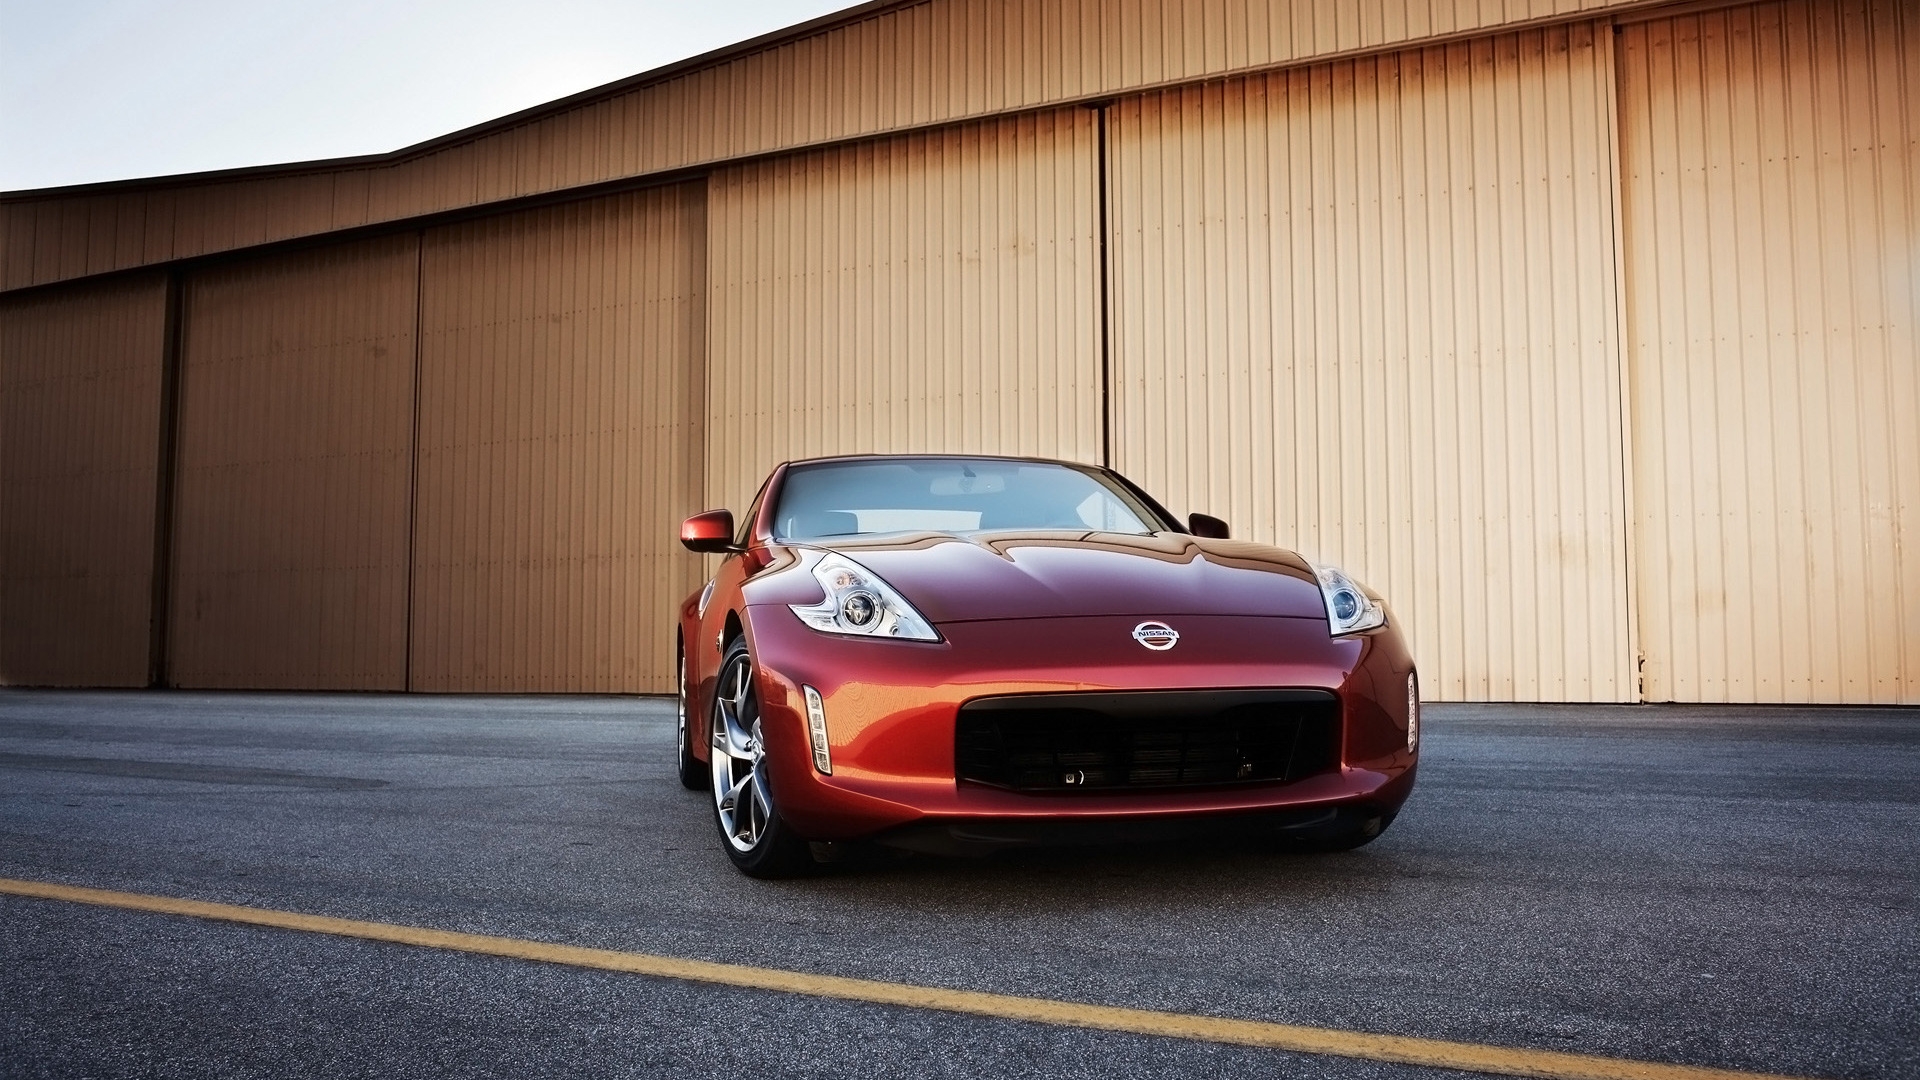 2013 Nissan 370Z Front for 1920 x 1080 HDTV 1080p resolution